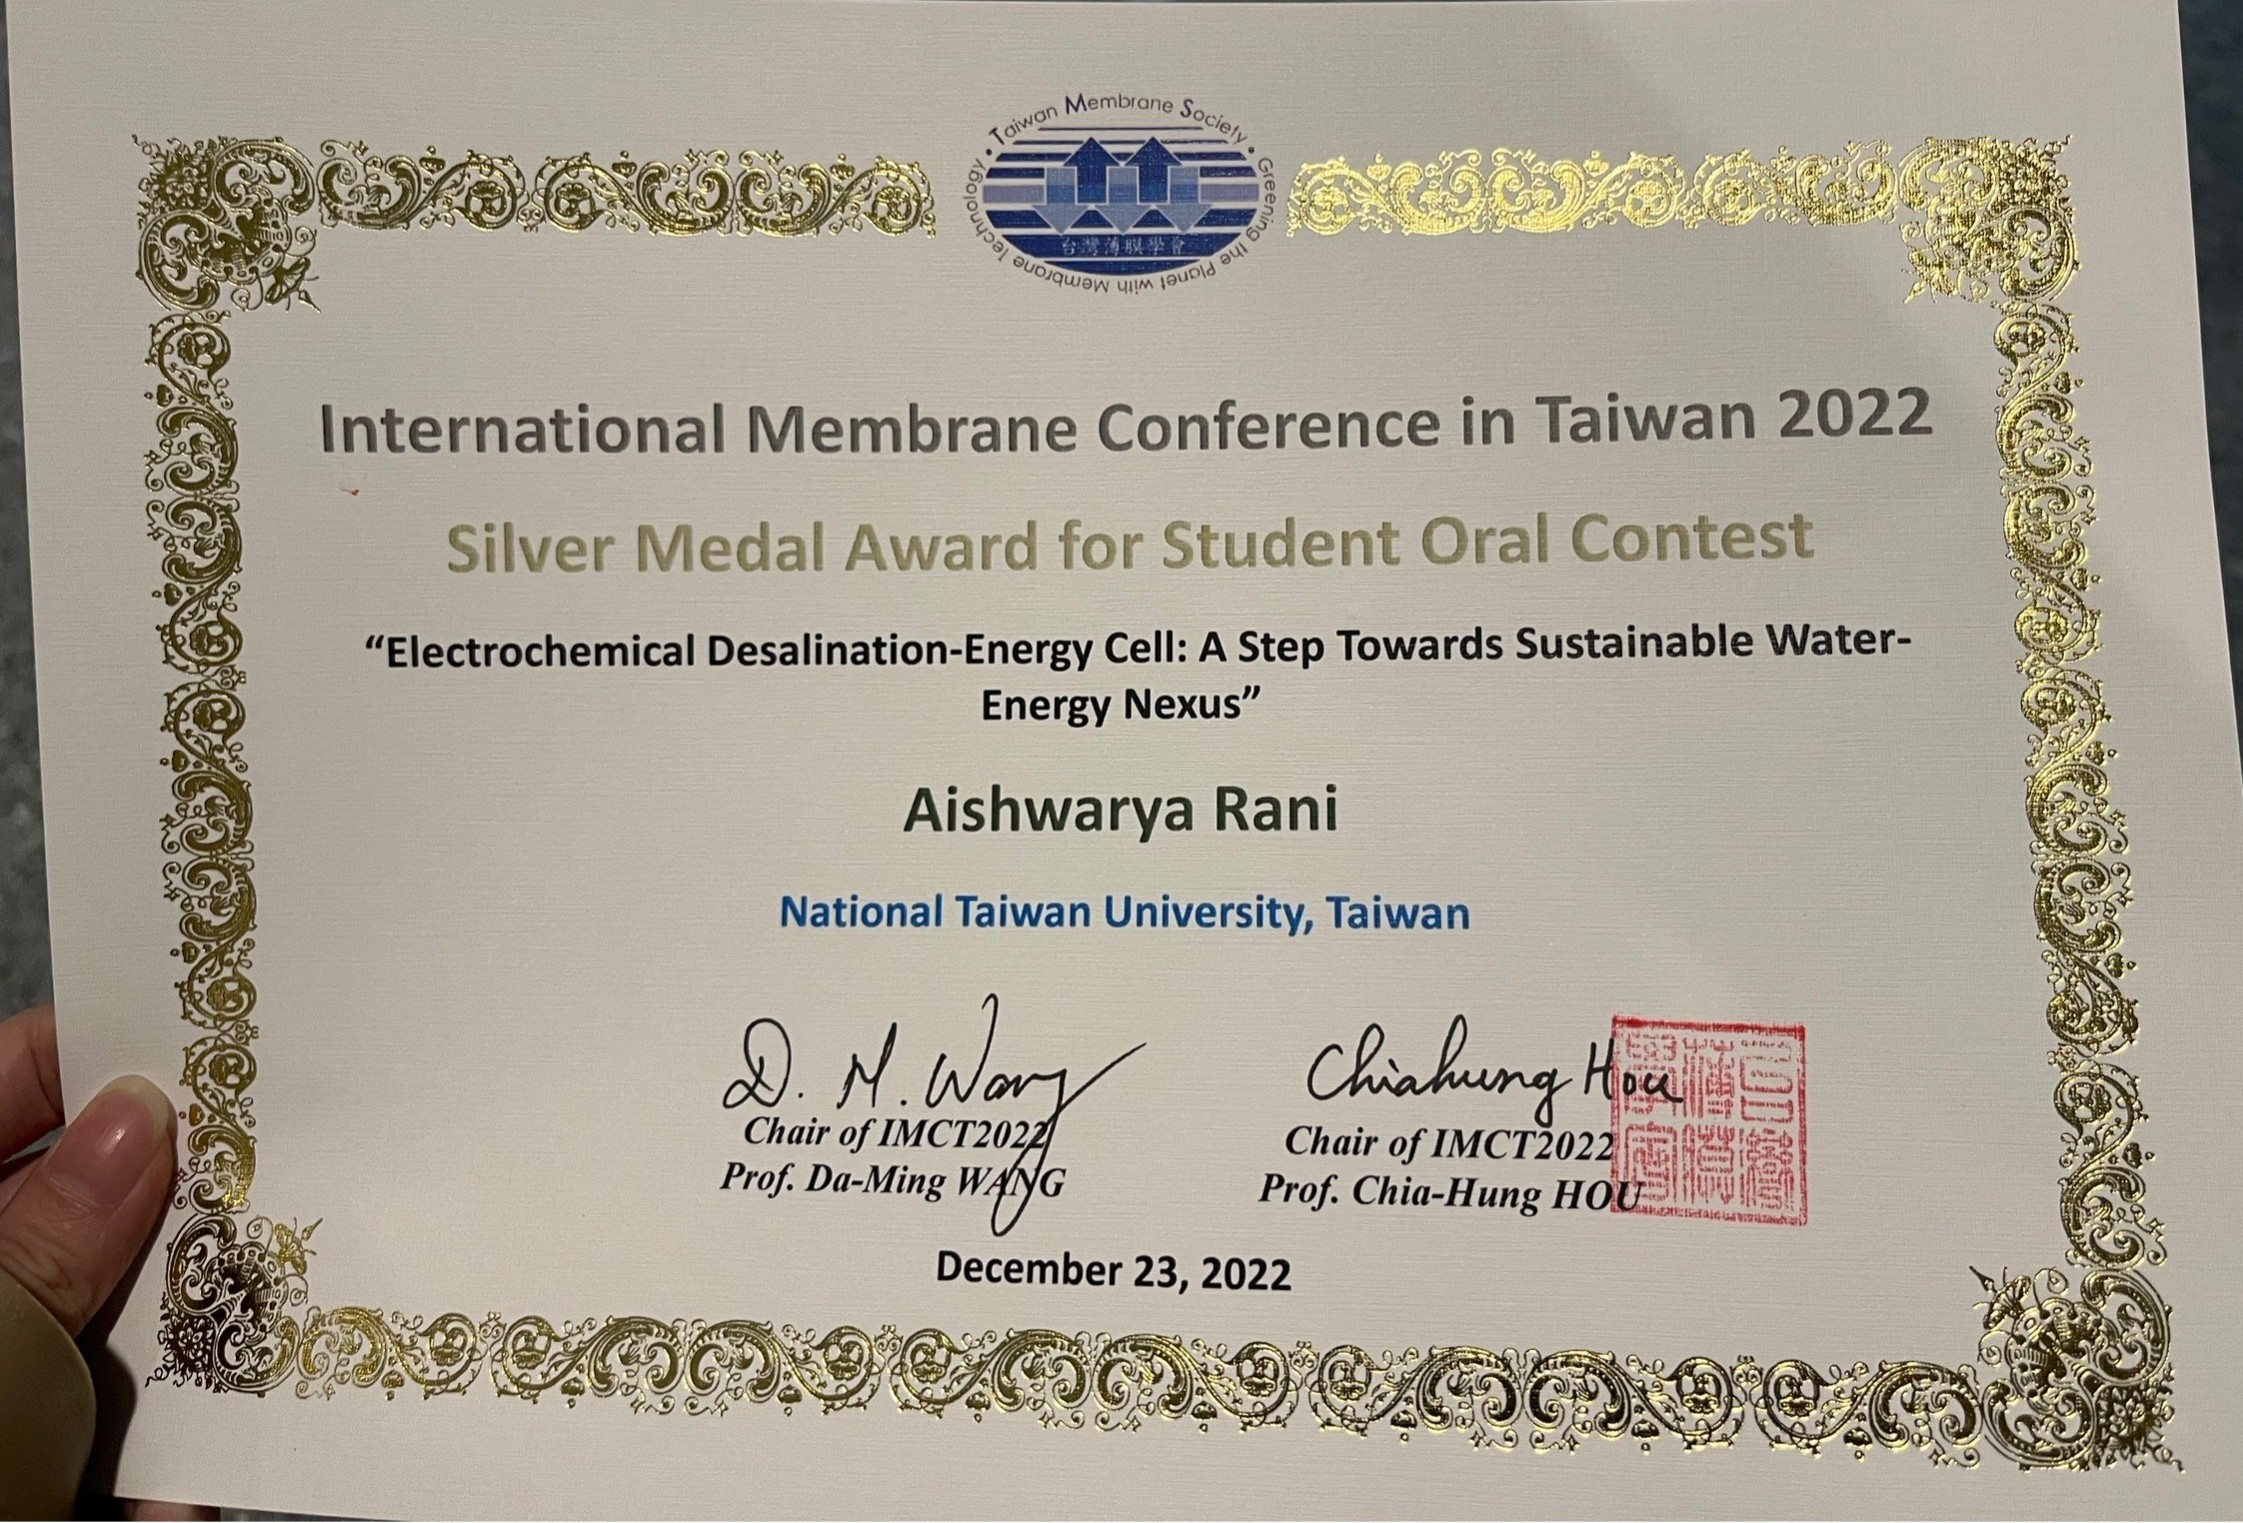 Congratulation to Rani for the Silver Medal Award for Student Oral Contest at 2022 IMCT